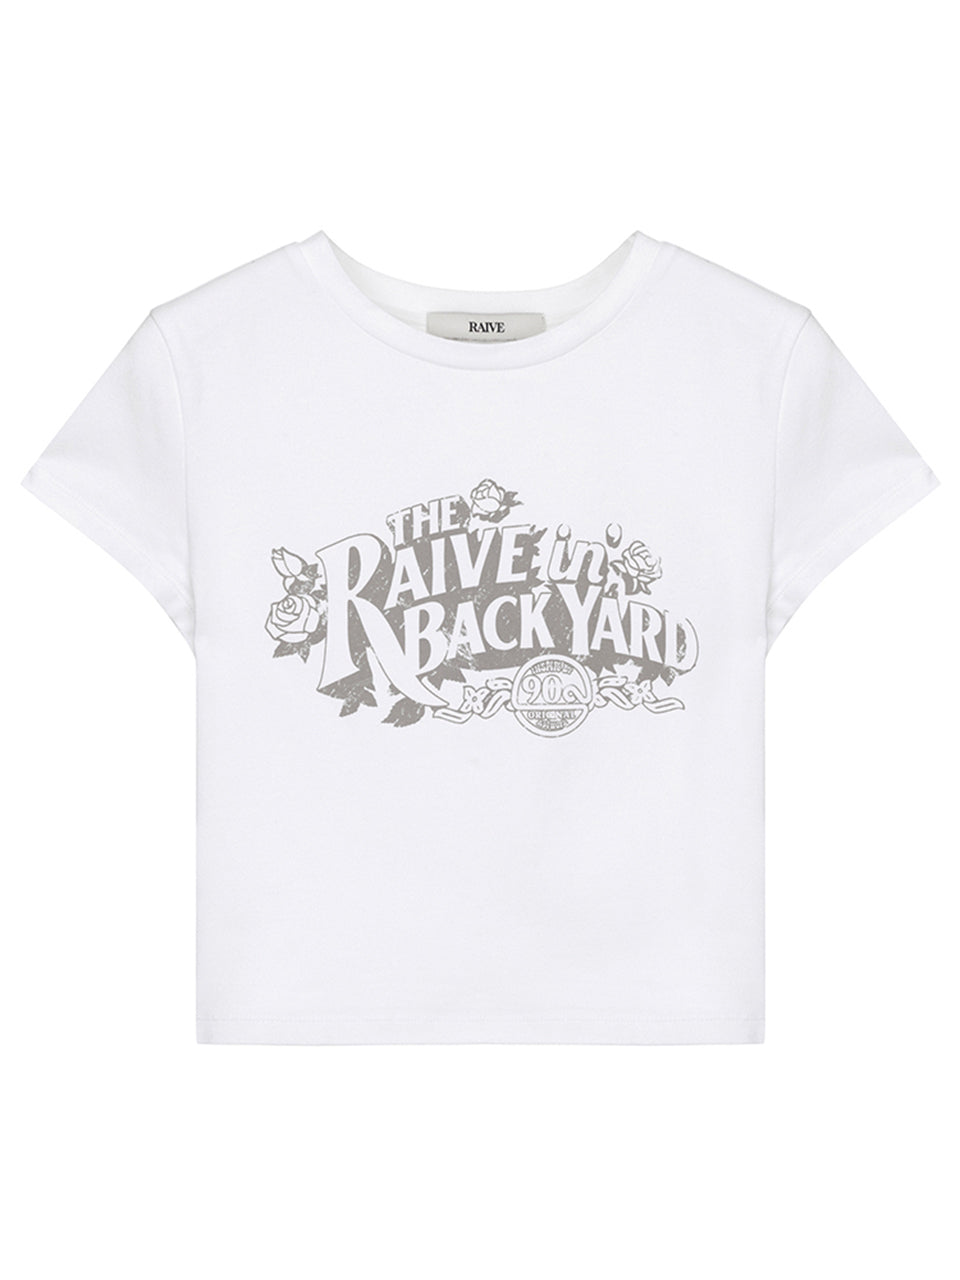 Back Yard Graphic T-shirt in White